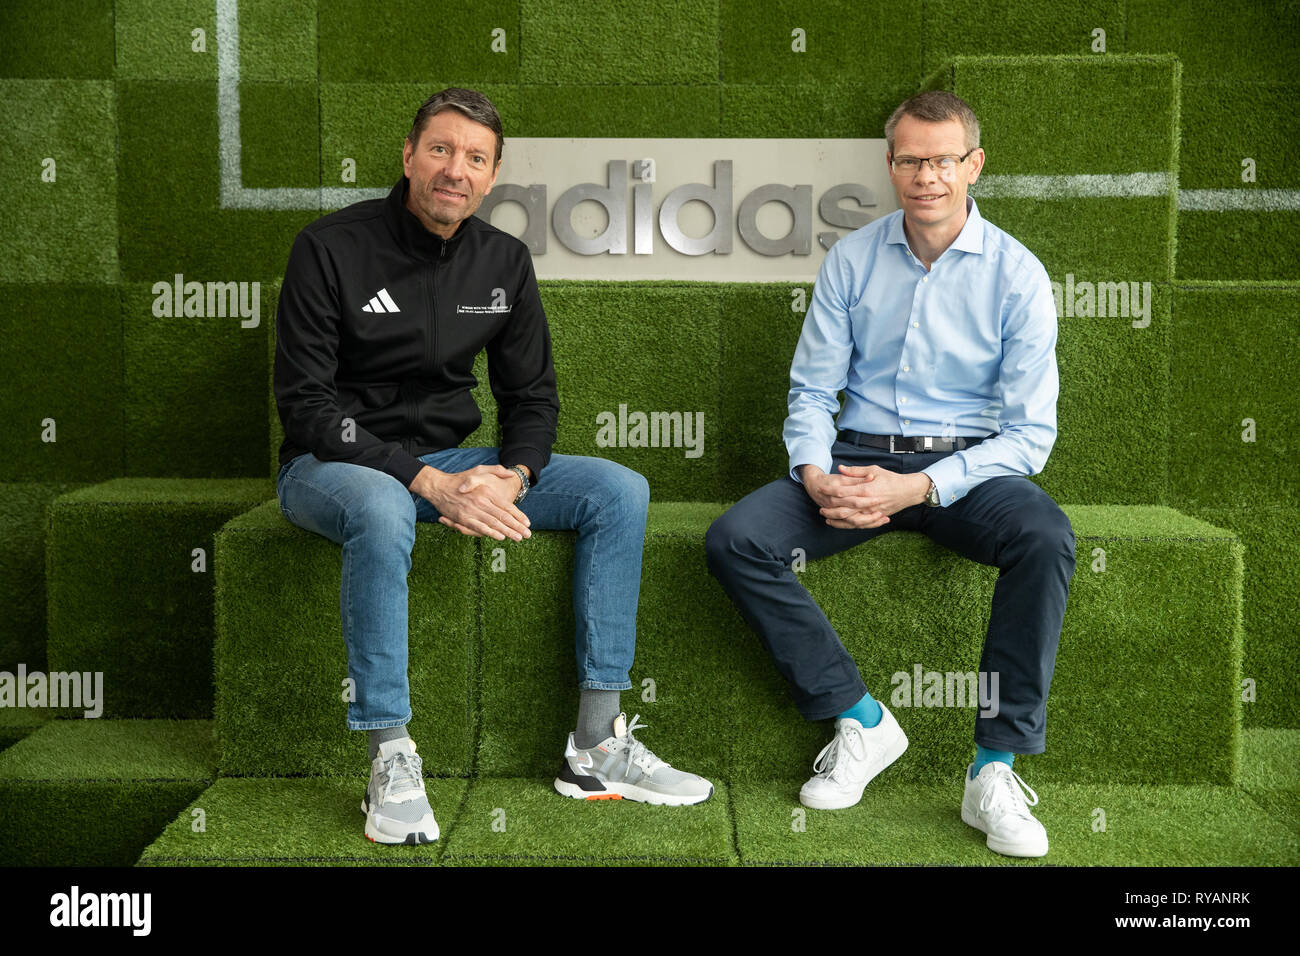 Herzogenaurach, Germany. 13th Mar, 2019. Kasper Rorsted (l), CEO of sports  goods manufacturer adidas AG, and Harm Ohlmeyer, CFO of adidas AG, will sit  next to the company logo before the start